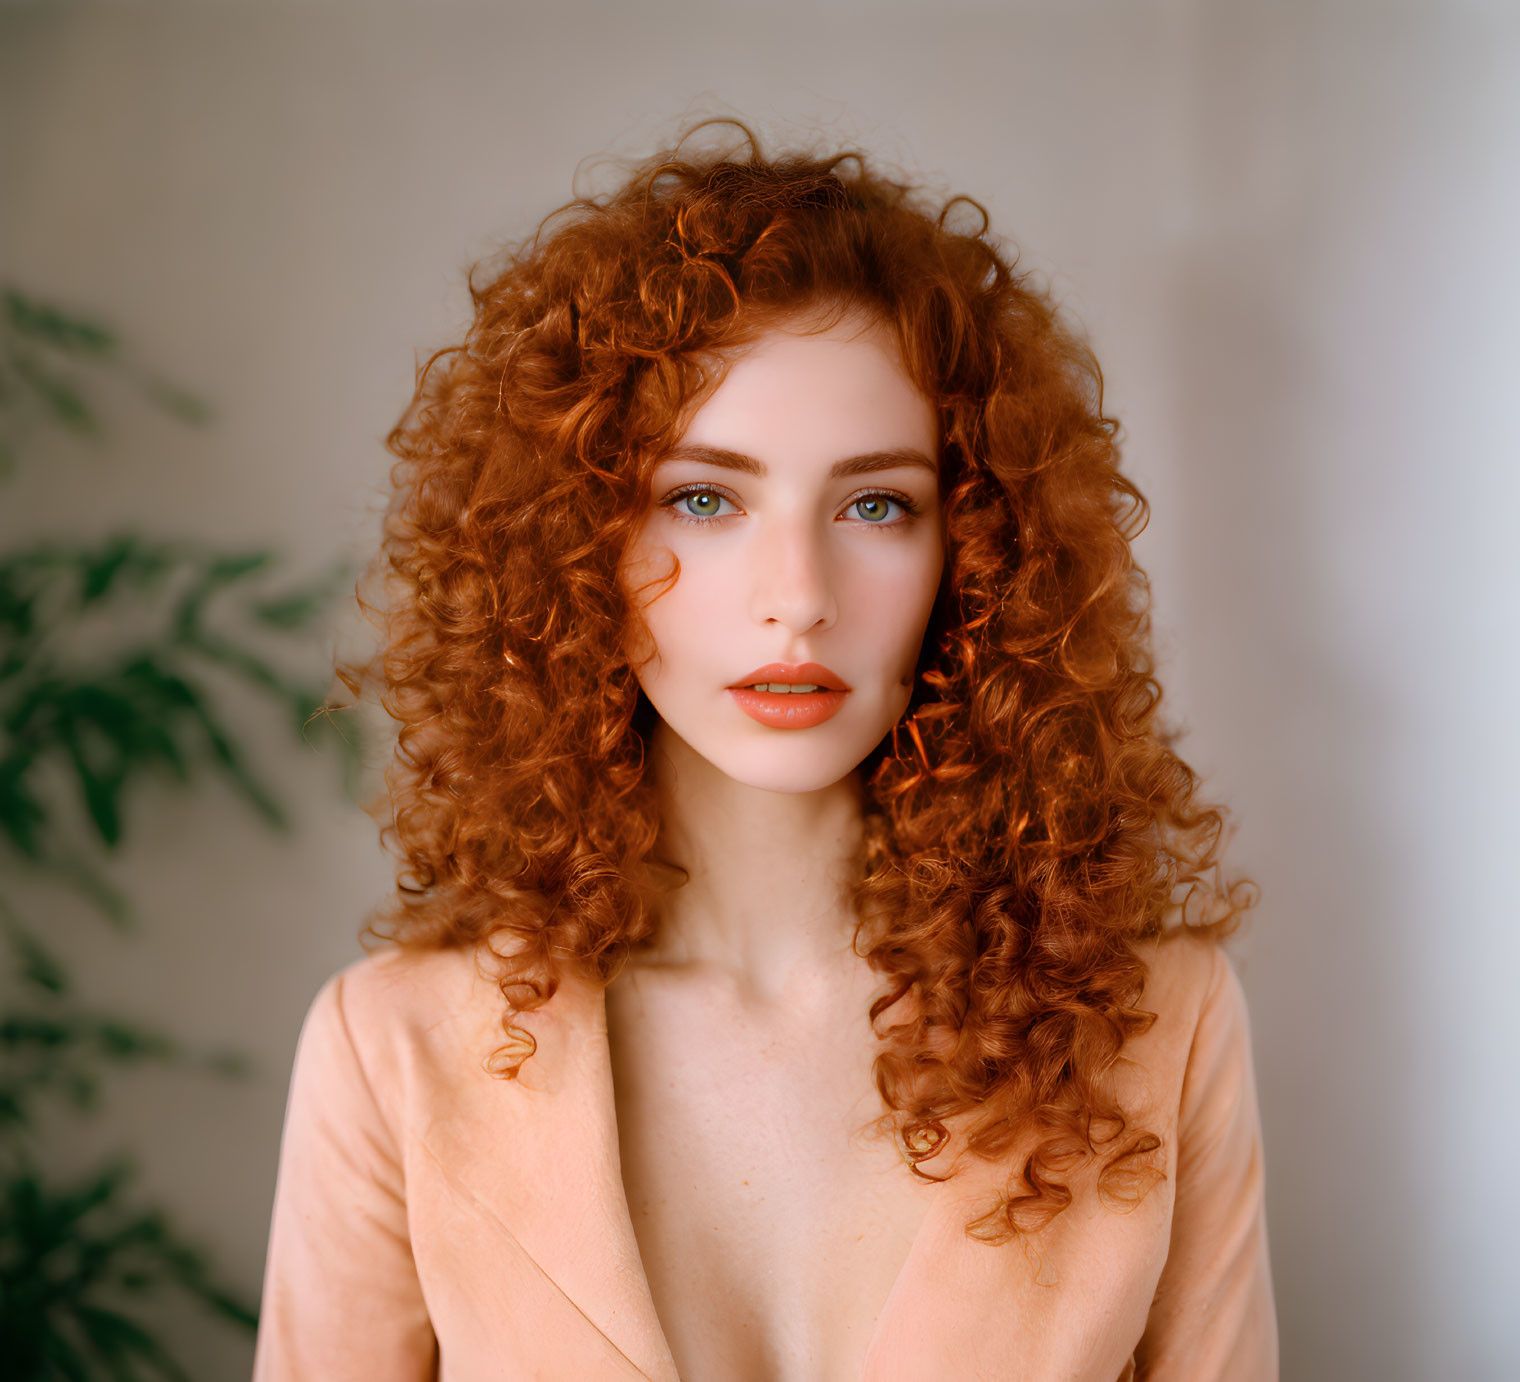 Curly Red-Haired Woman in Peach Blazer with Blue Eyes and Plants